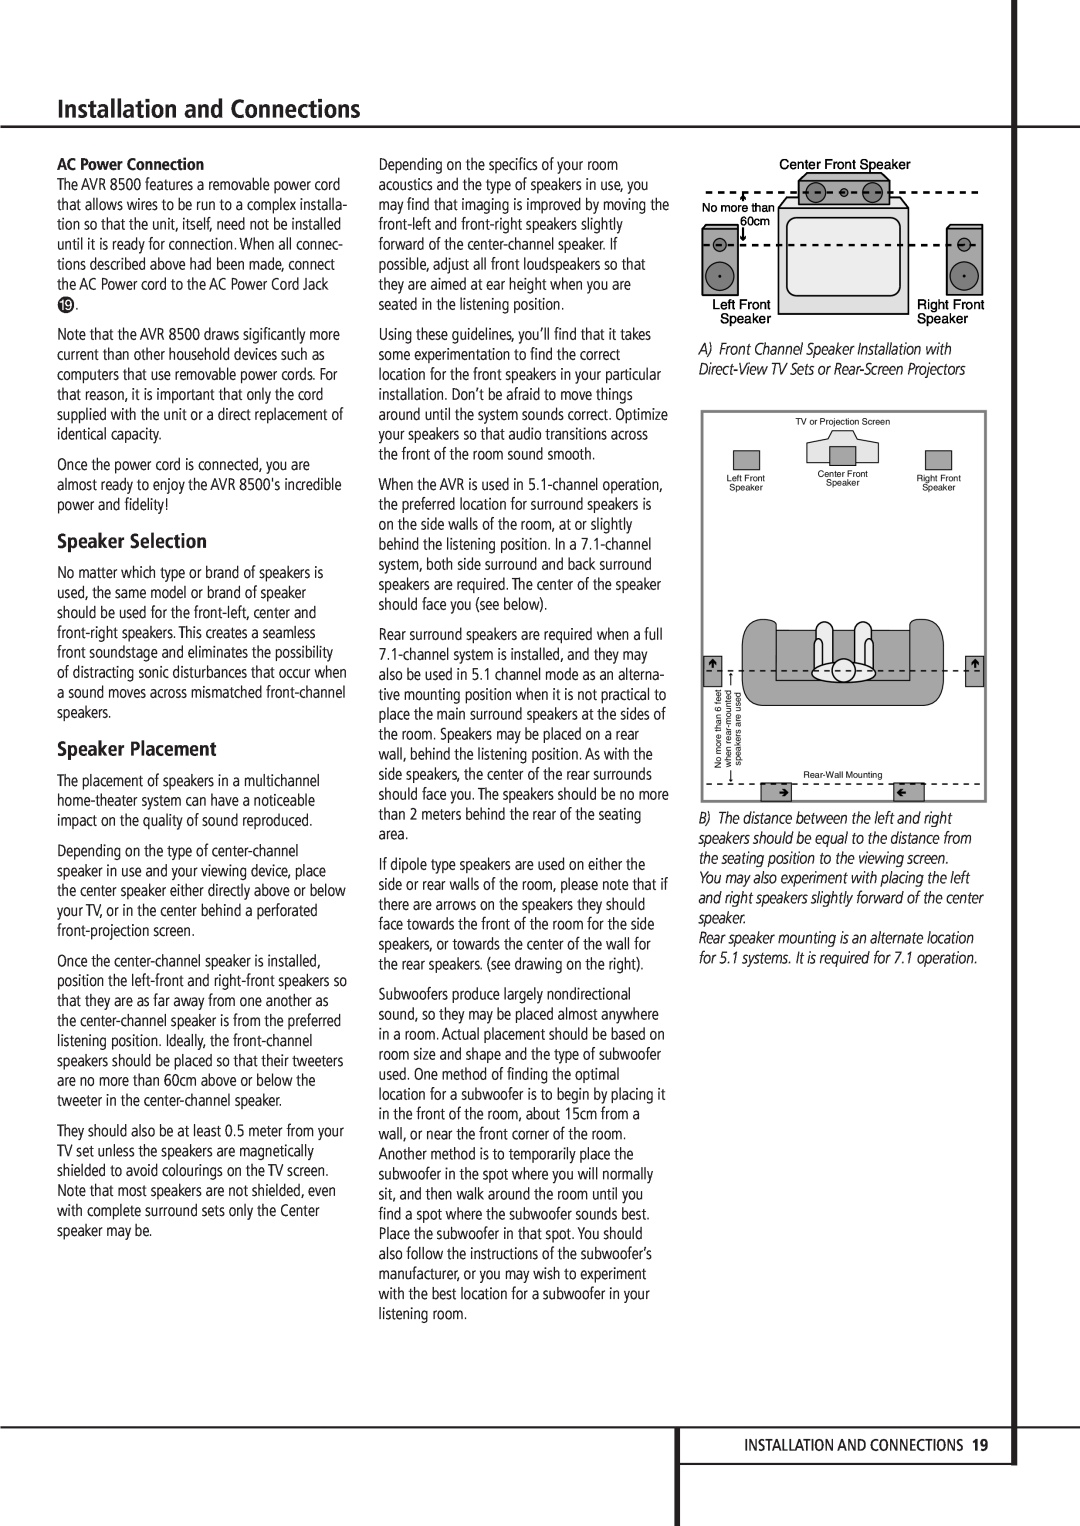 Harman-Kardon AVR 8500 owner manual Speaker Selection, Speaker Placement, Installation and Connections, AC Power Connection 